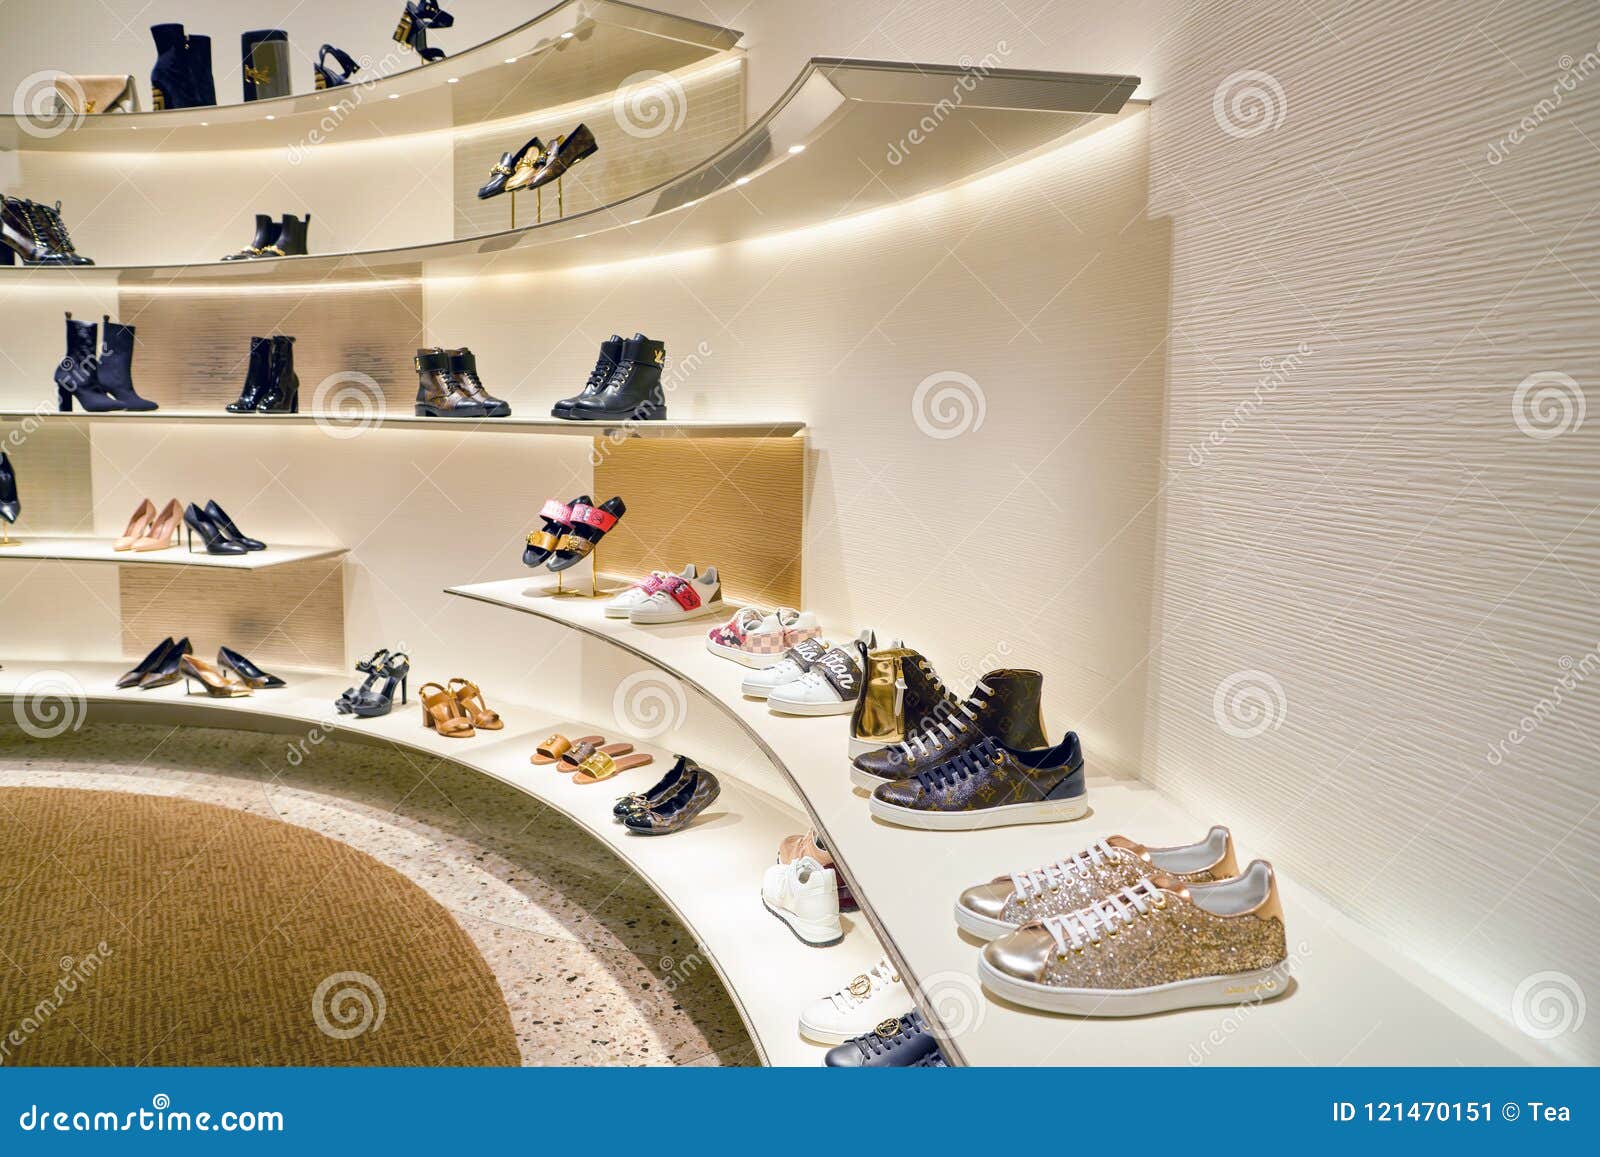 Louis Vuitton Clothing Store in Rome Editorial Photo - Image of